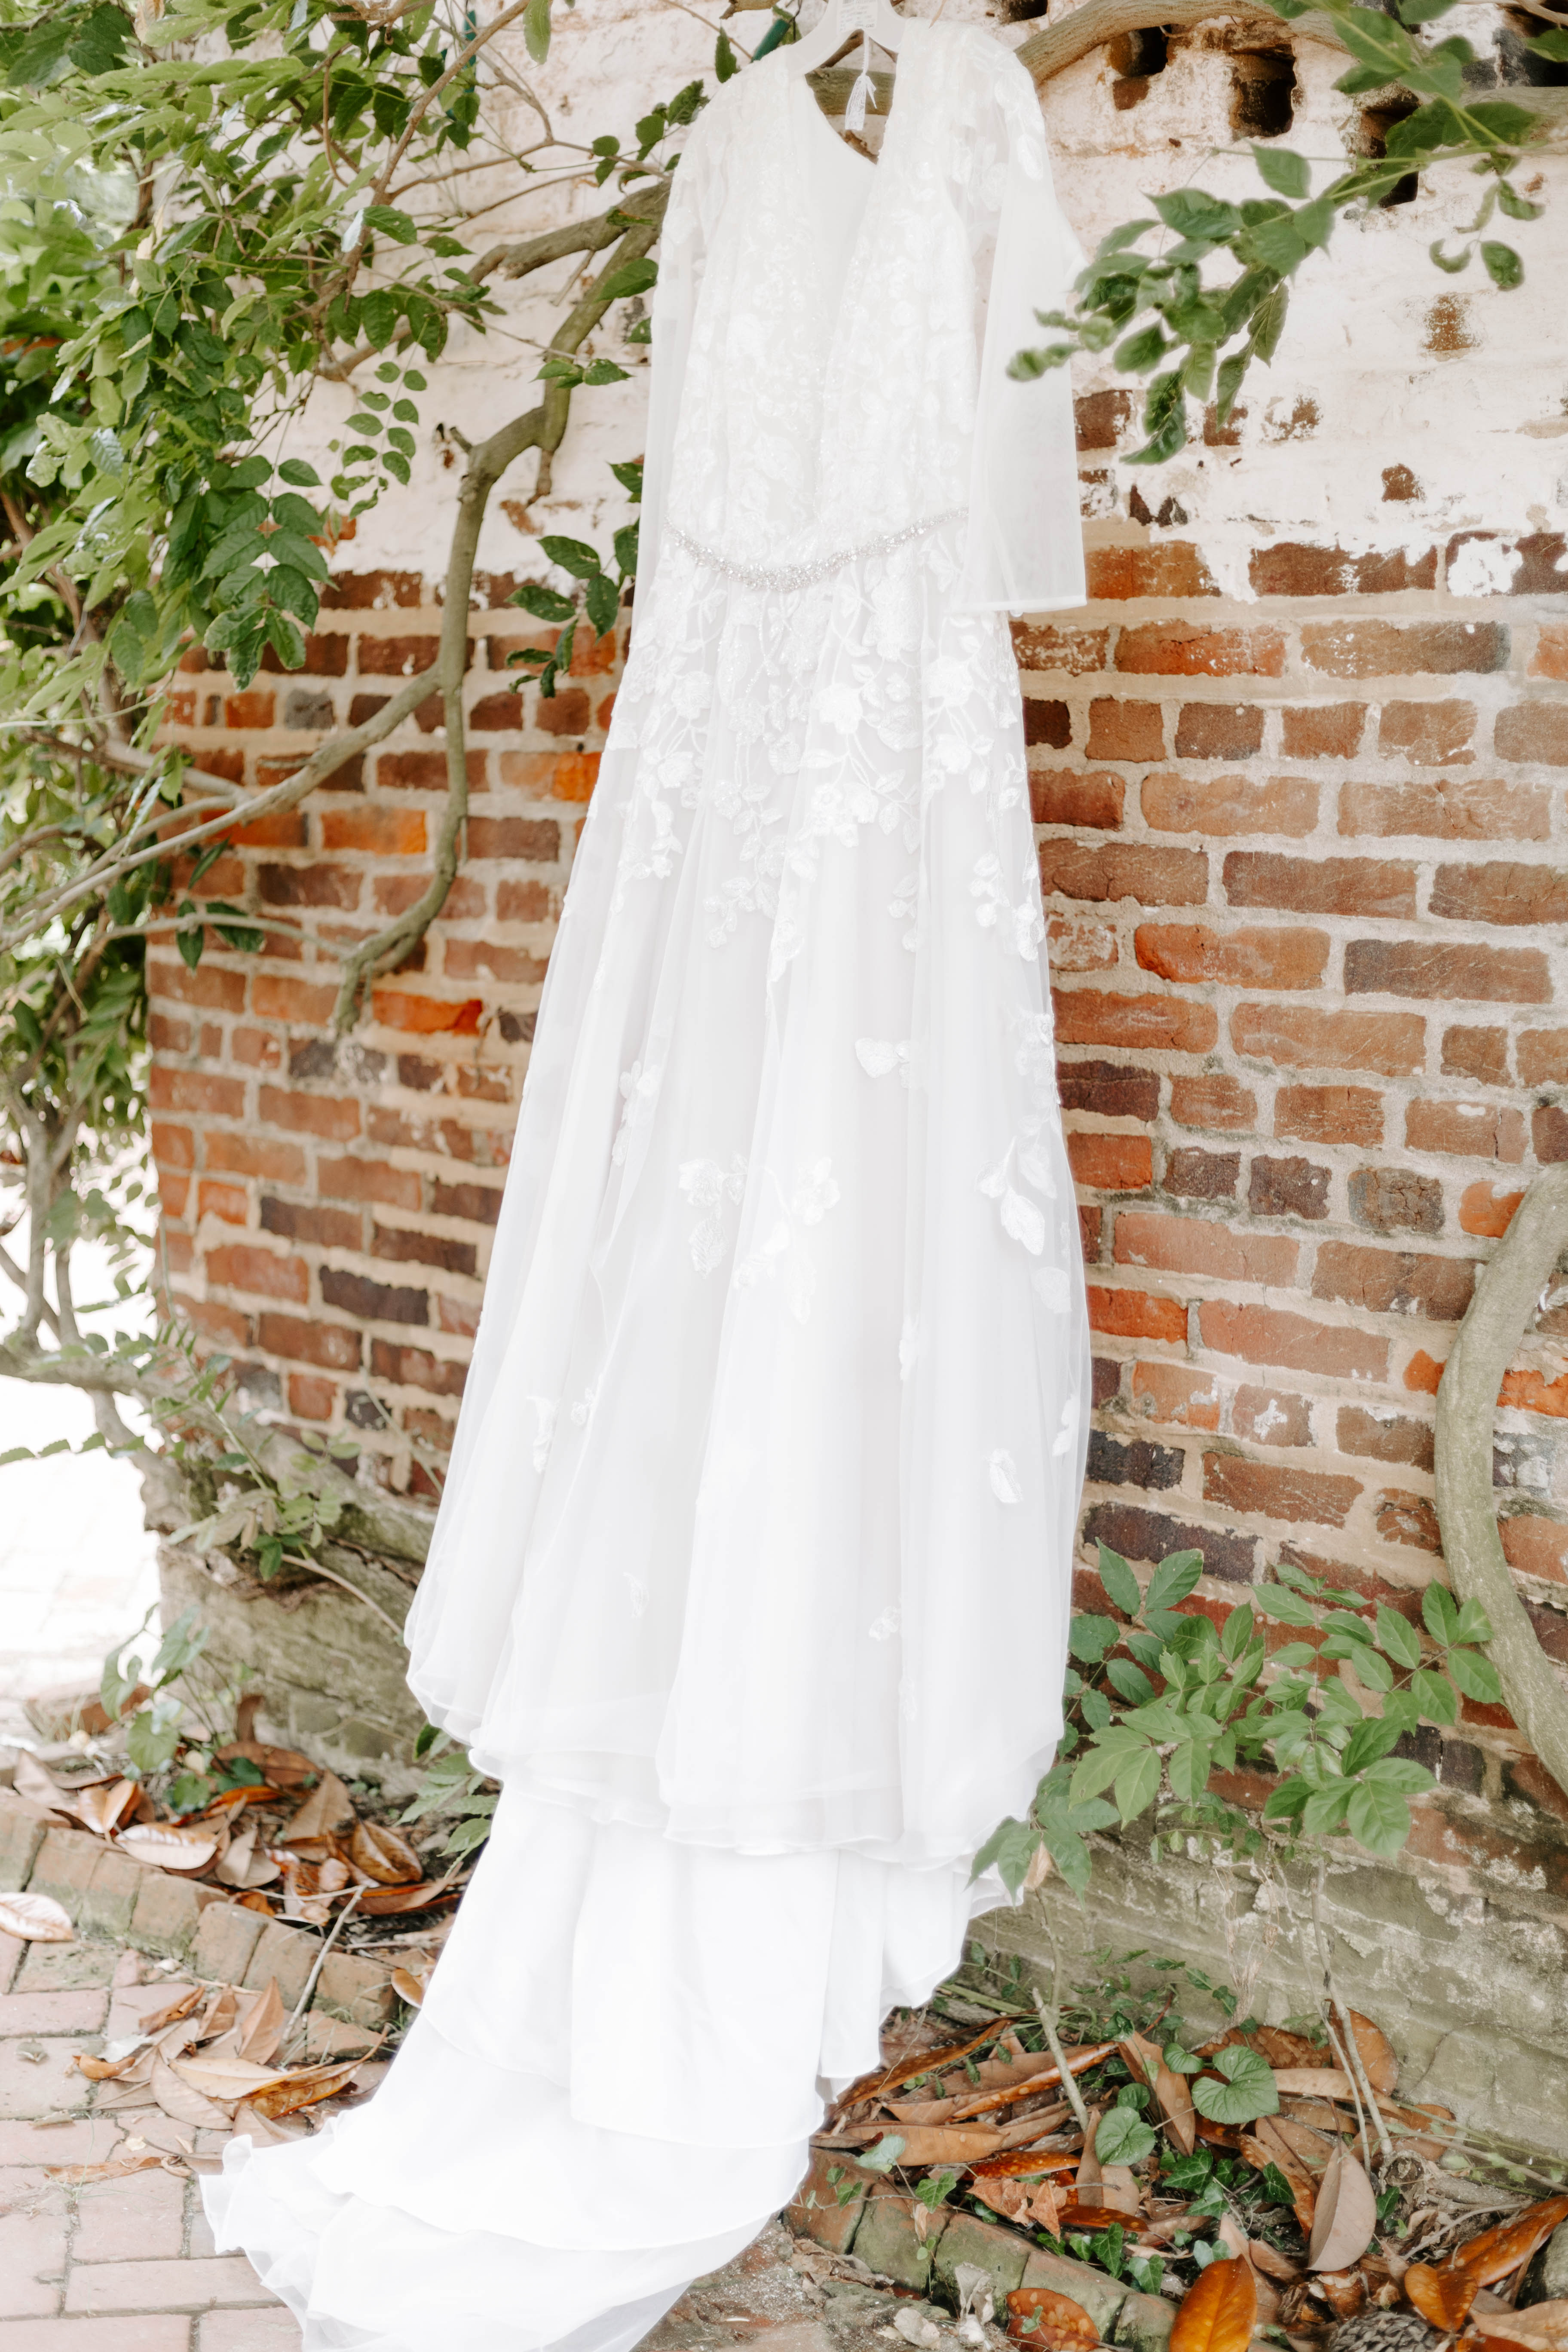 Spring wedding dress hanging for Delaware wedding  at Historic Odessa. Modern wedding photographer and Delaware wedding photographer Alli McGrath photographed this candid moment.